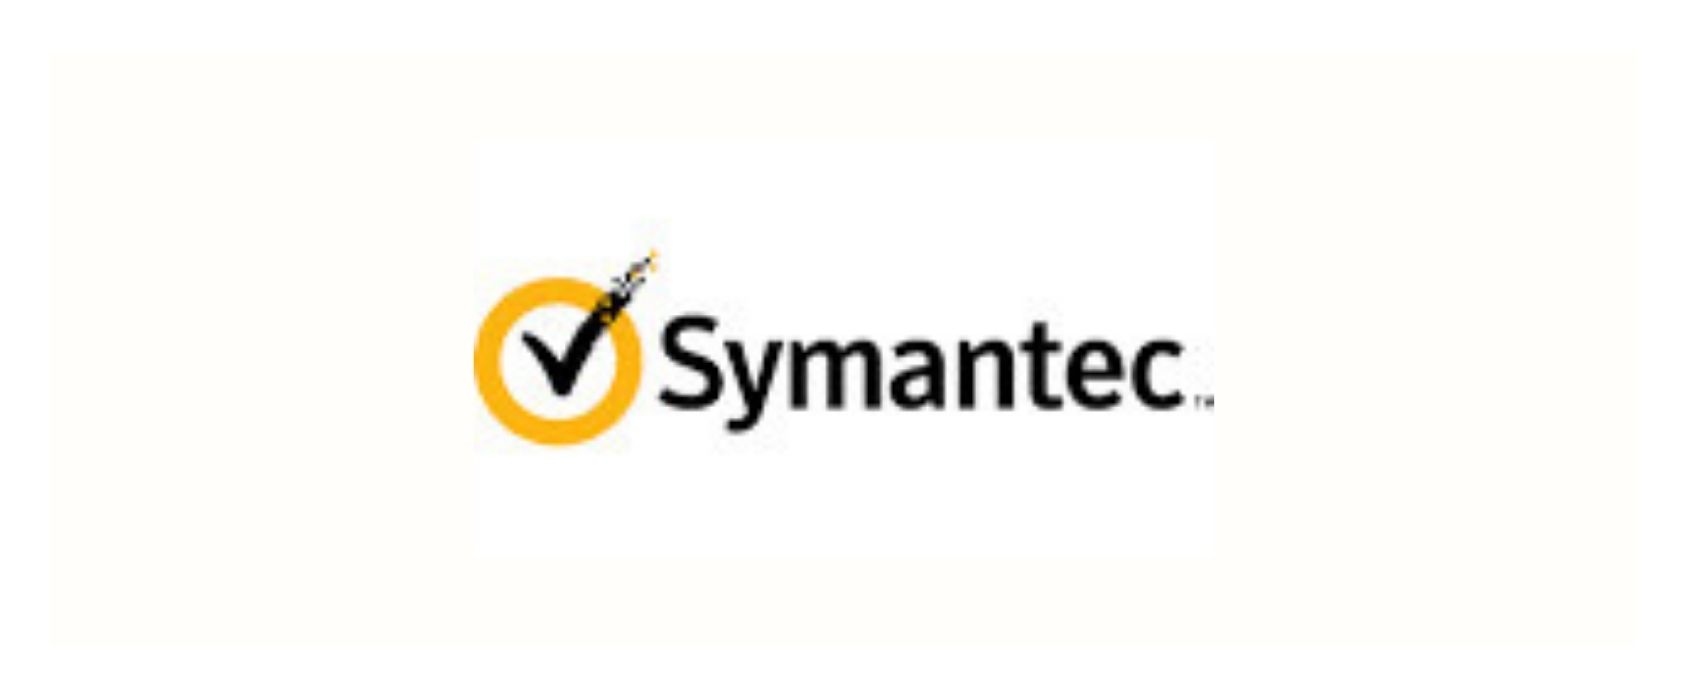 Click here if to access to Symantec and add your own filters